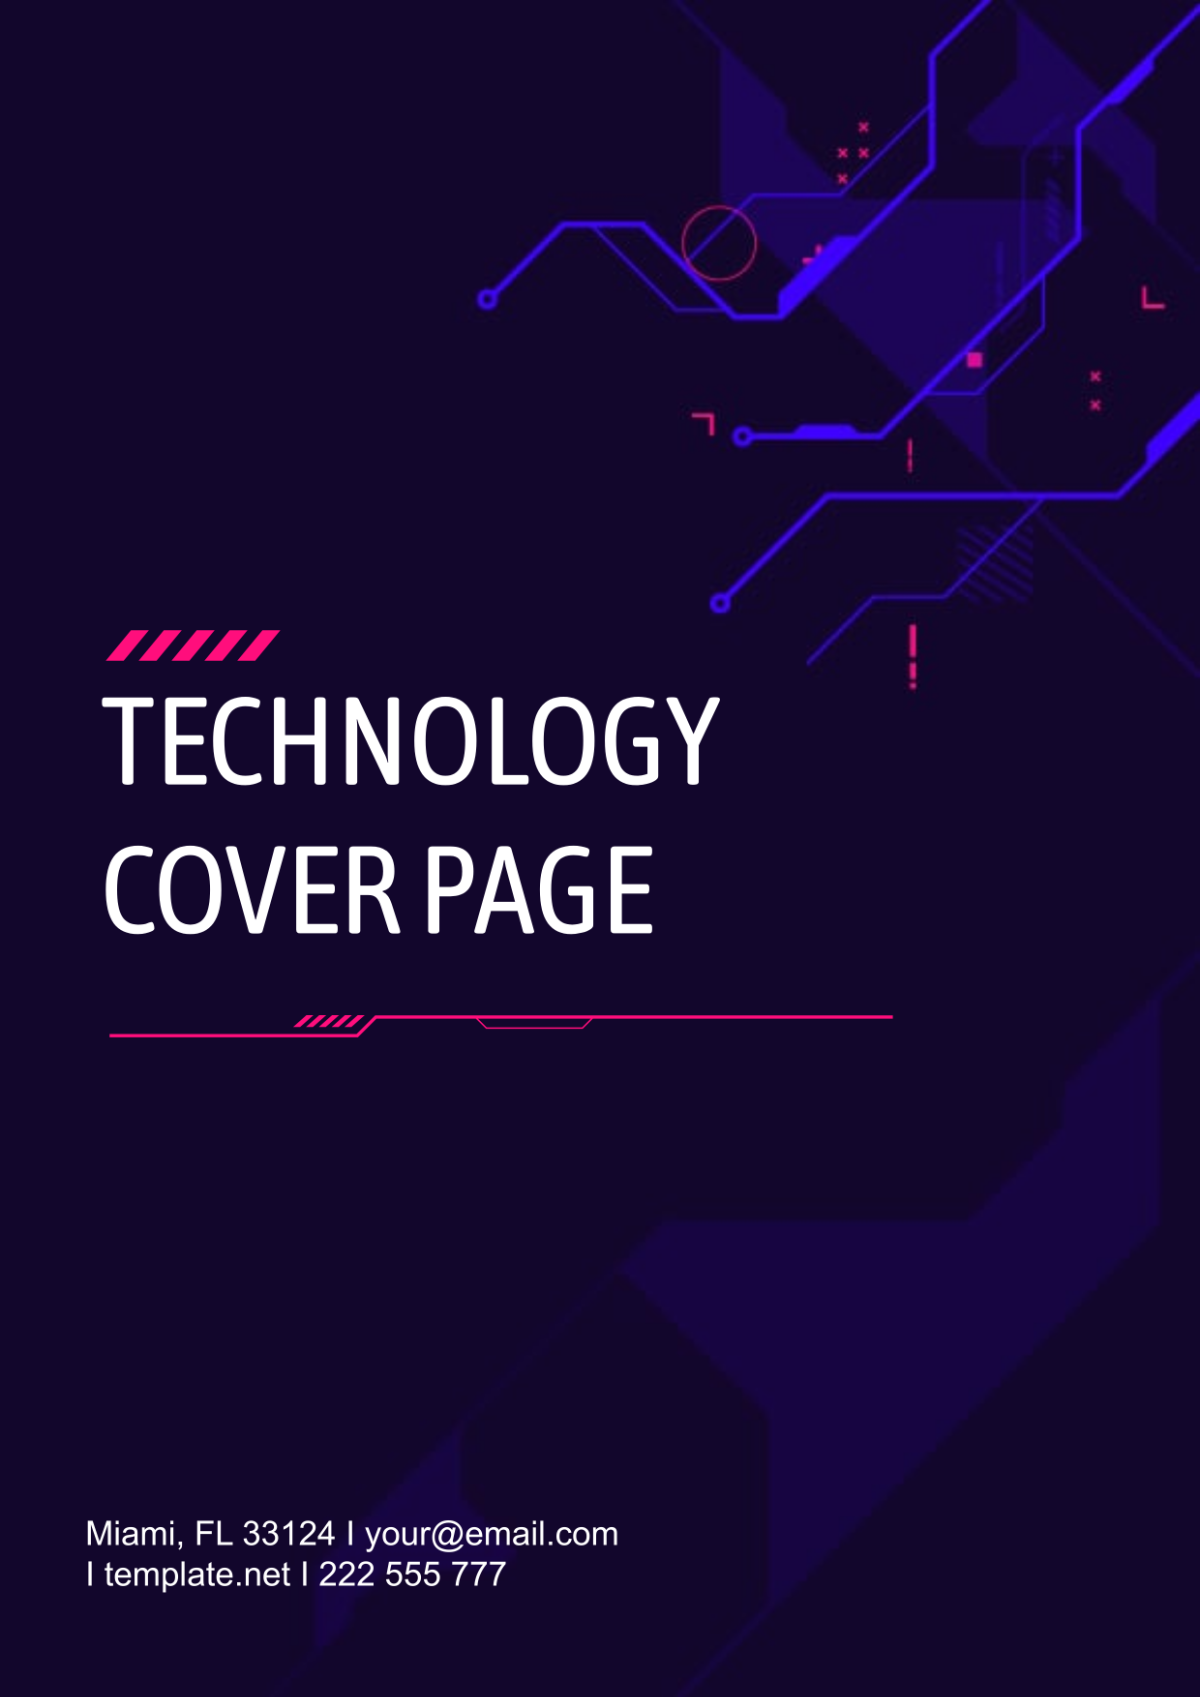 Technology Cover Page Image 